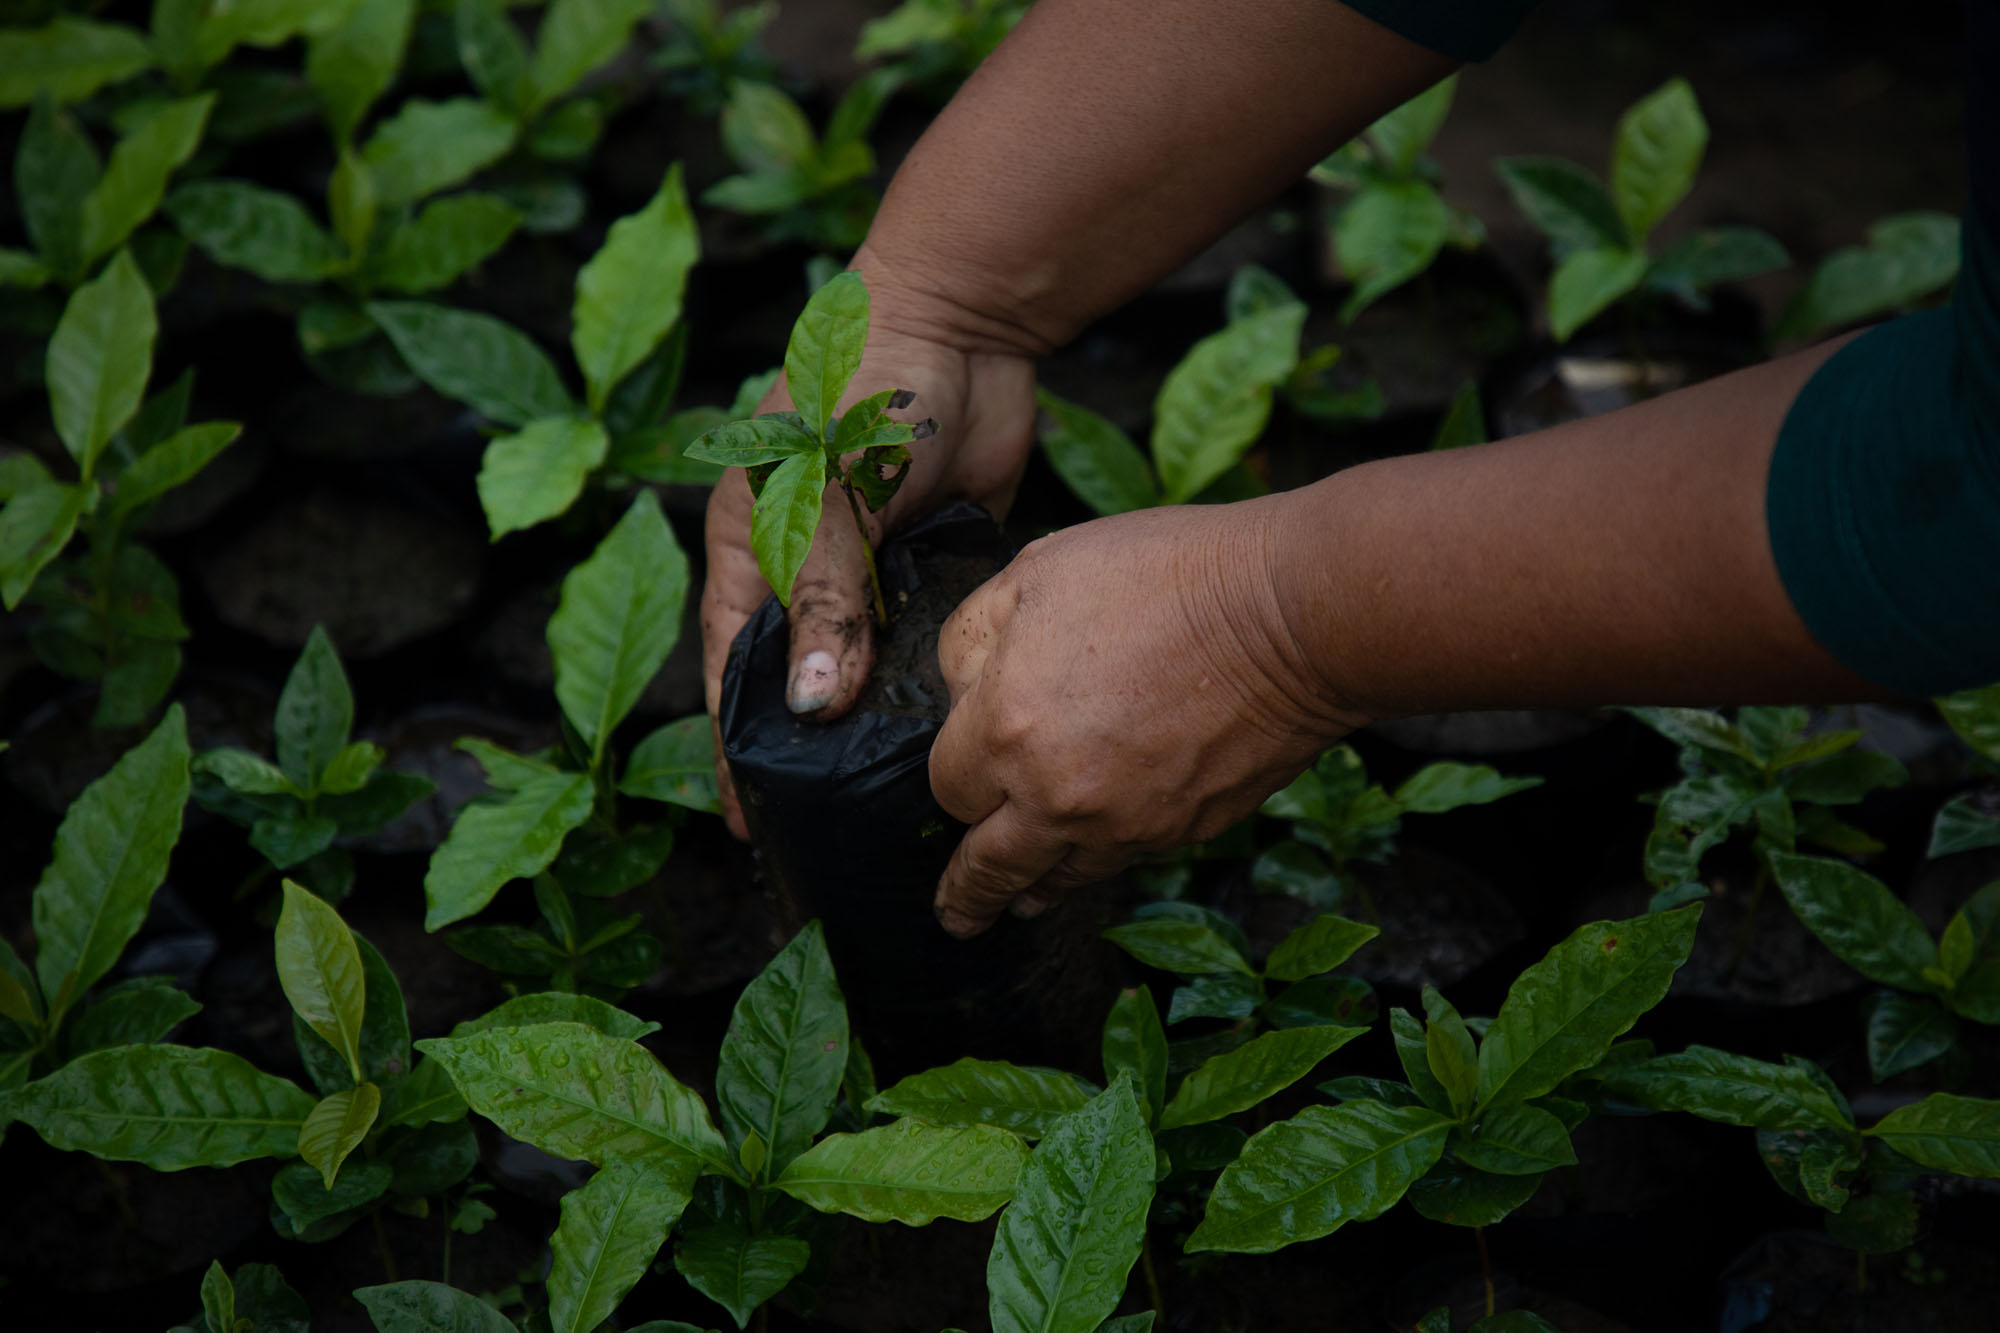 A farmer adjusts a coffee plant start in a greenhouse.